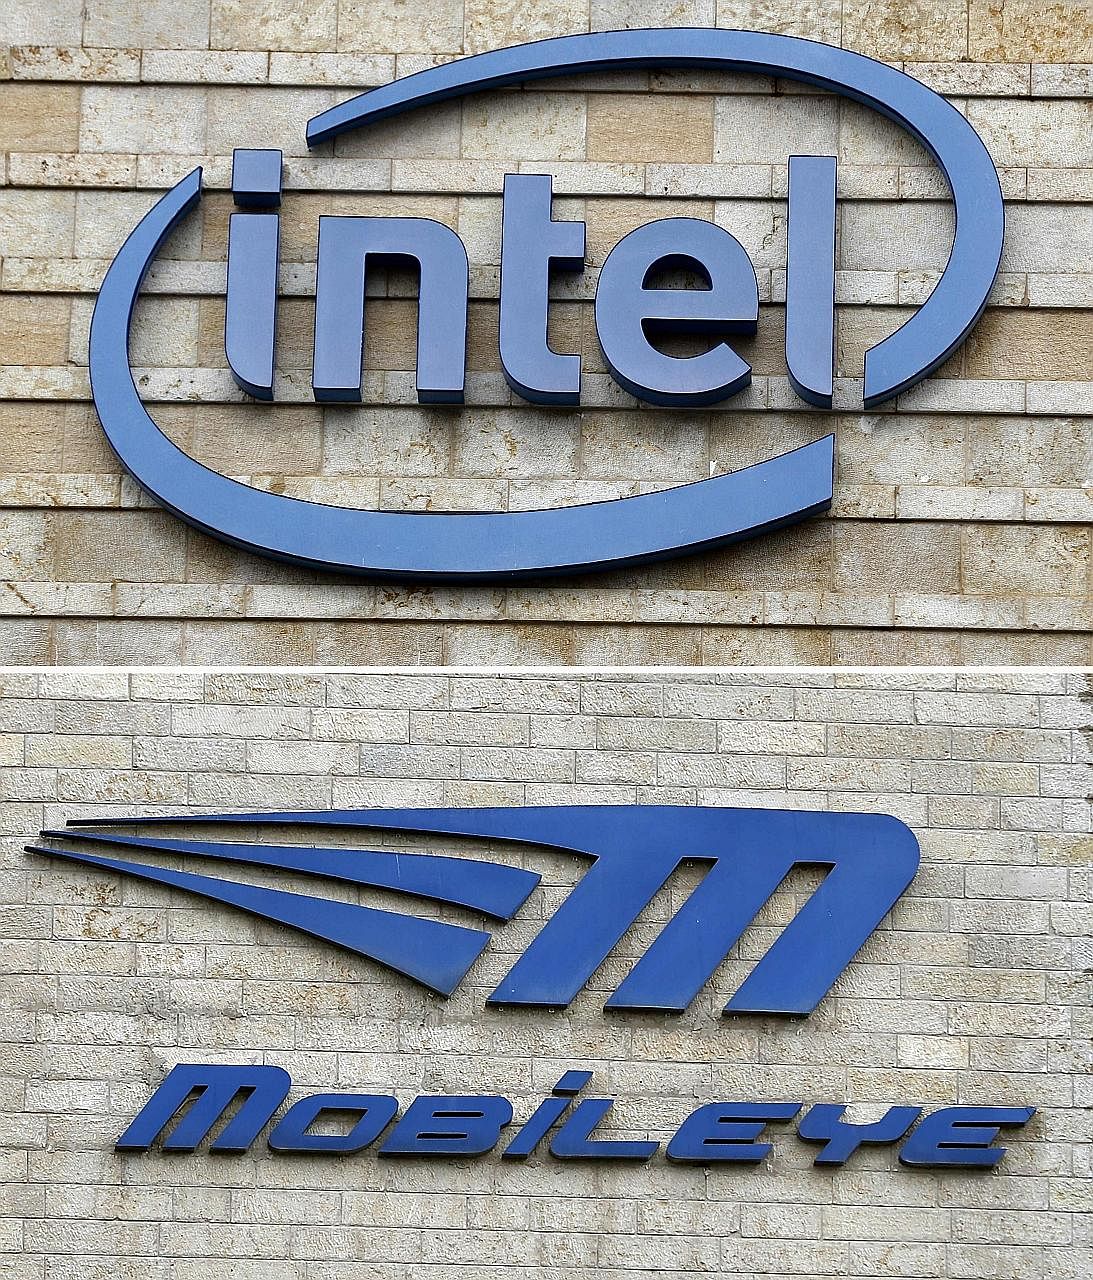 Intel's $22 billion purchase of Mobileye could thrust the US chipmaker into direct competition with rivals Nvidia and Qualcomm to develop driverless systems for global carmakers.